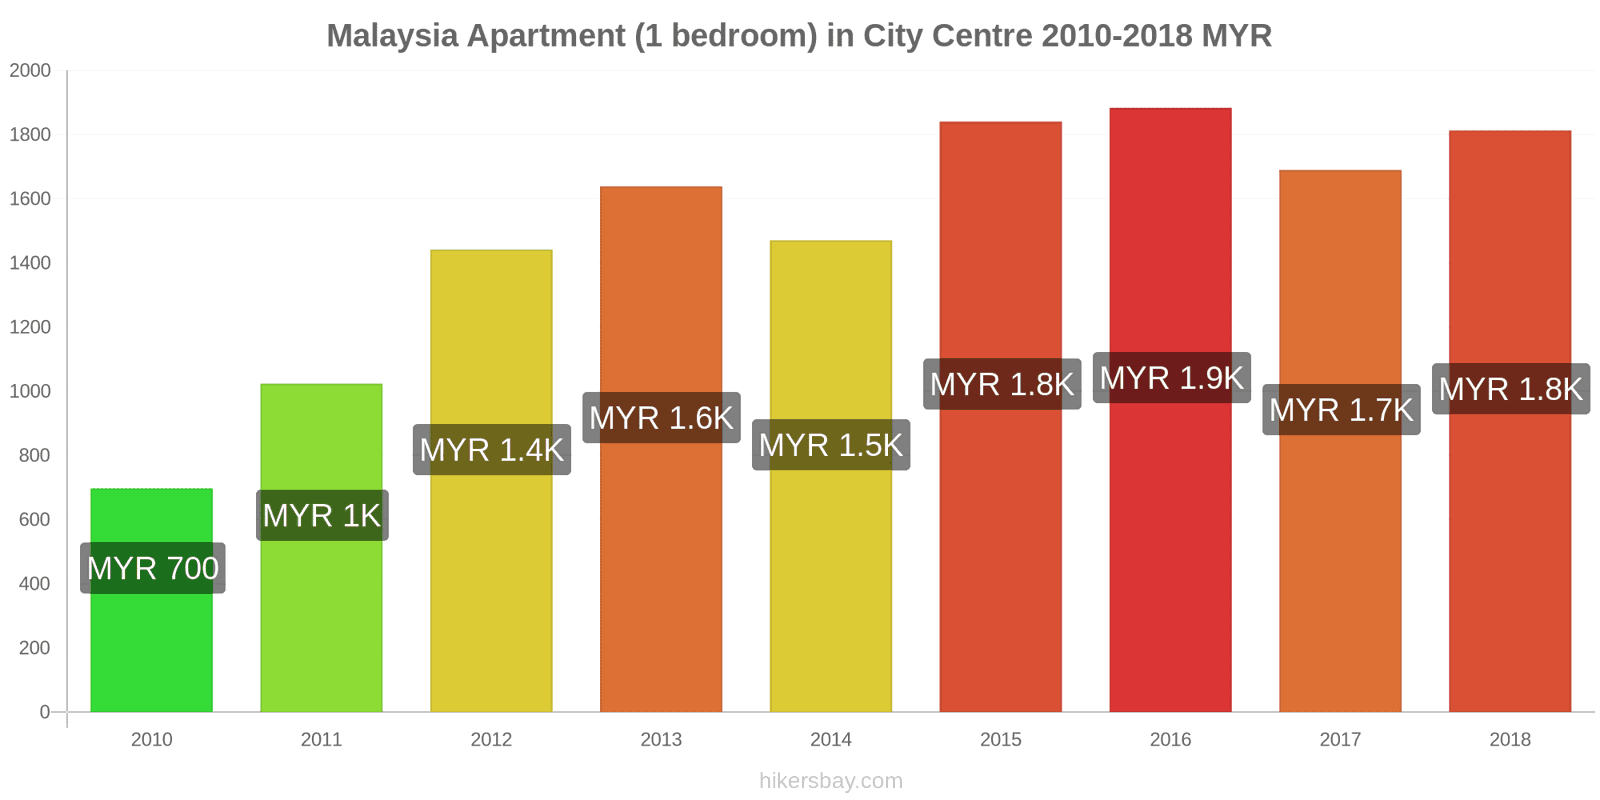 Malaysia price changes Apartment (1 bedroom) in city centre hikersbay.com